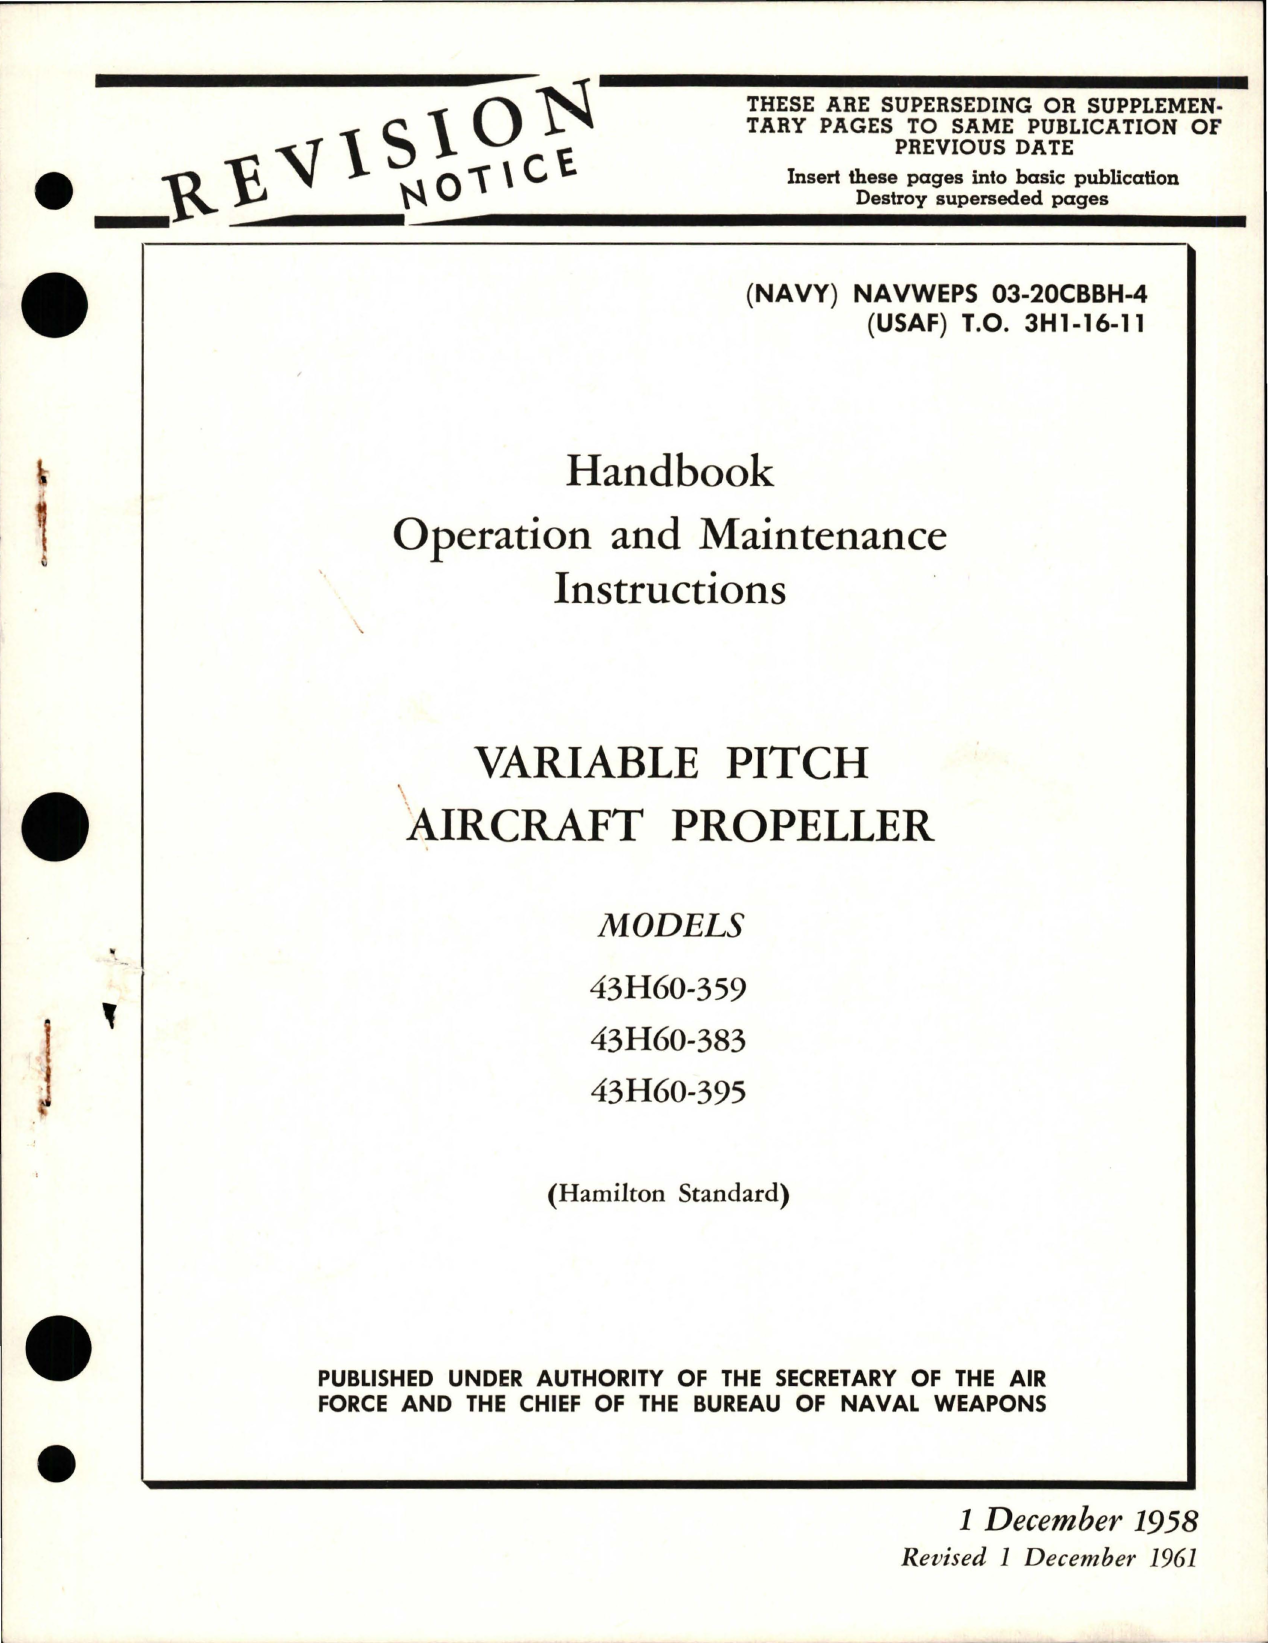 Sample page 1 from AirCorps Library document: Operation and Maintenance Instructions for Variable Pitch Propeller - Models 43H60-359, 43H60-383, and 43H60-395